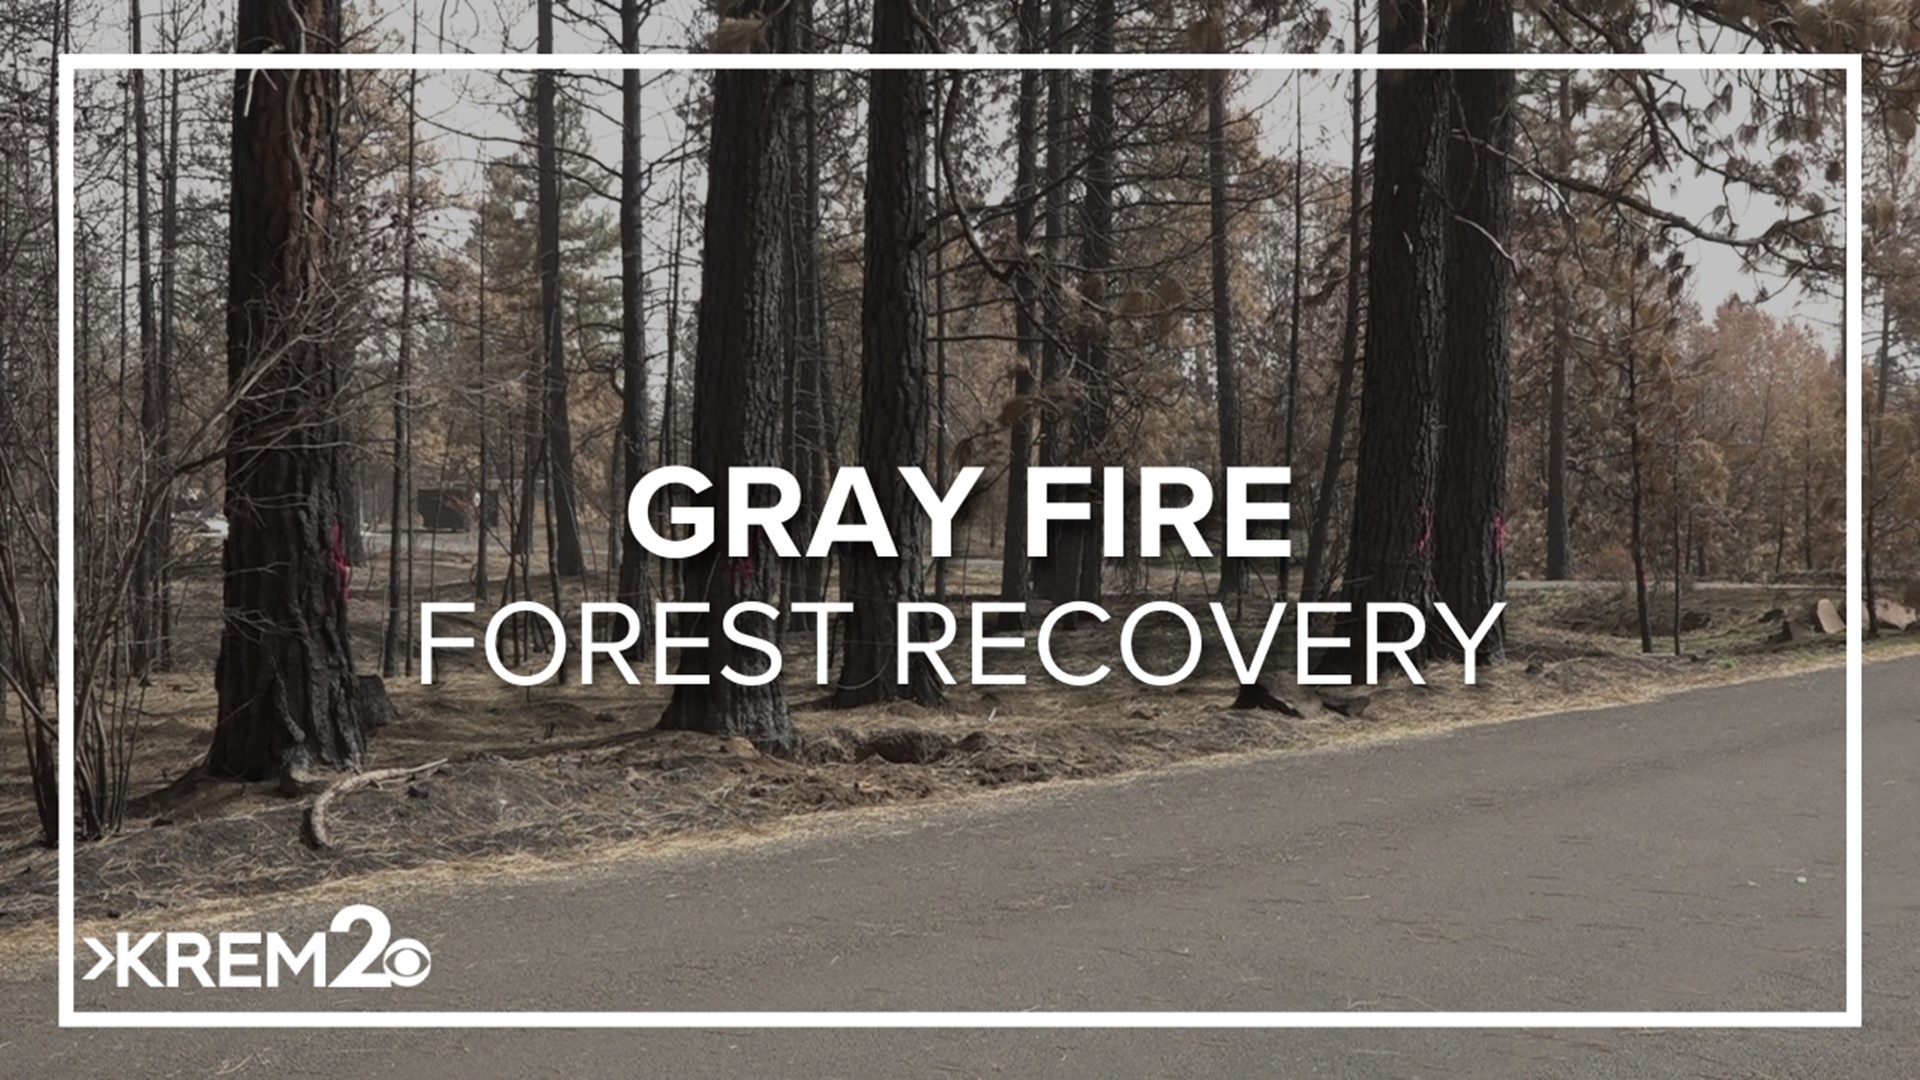 With more than 10,000 acres burned in and around Medical Lake, there's plenty of work to be done between rebuilding homes and preserving the forest.